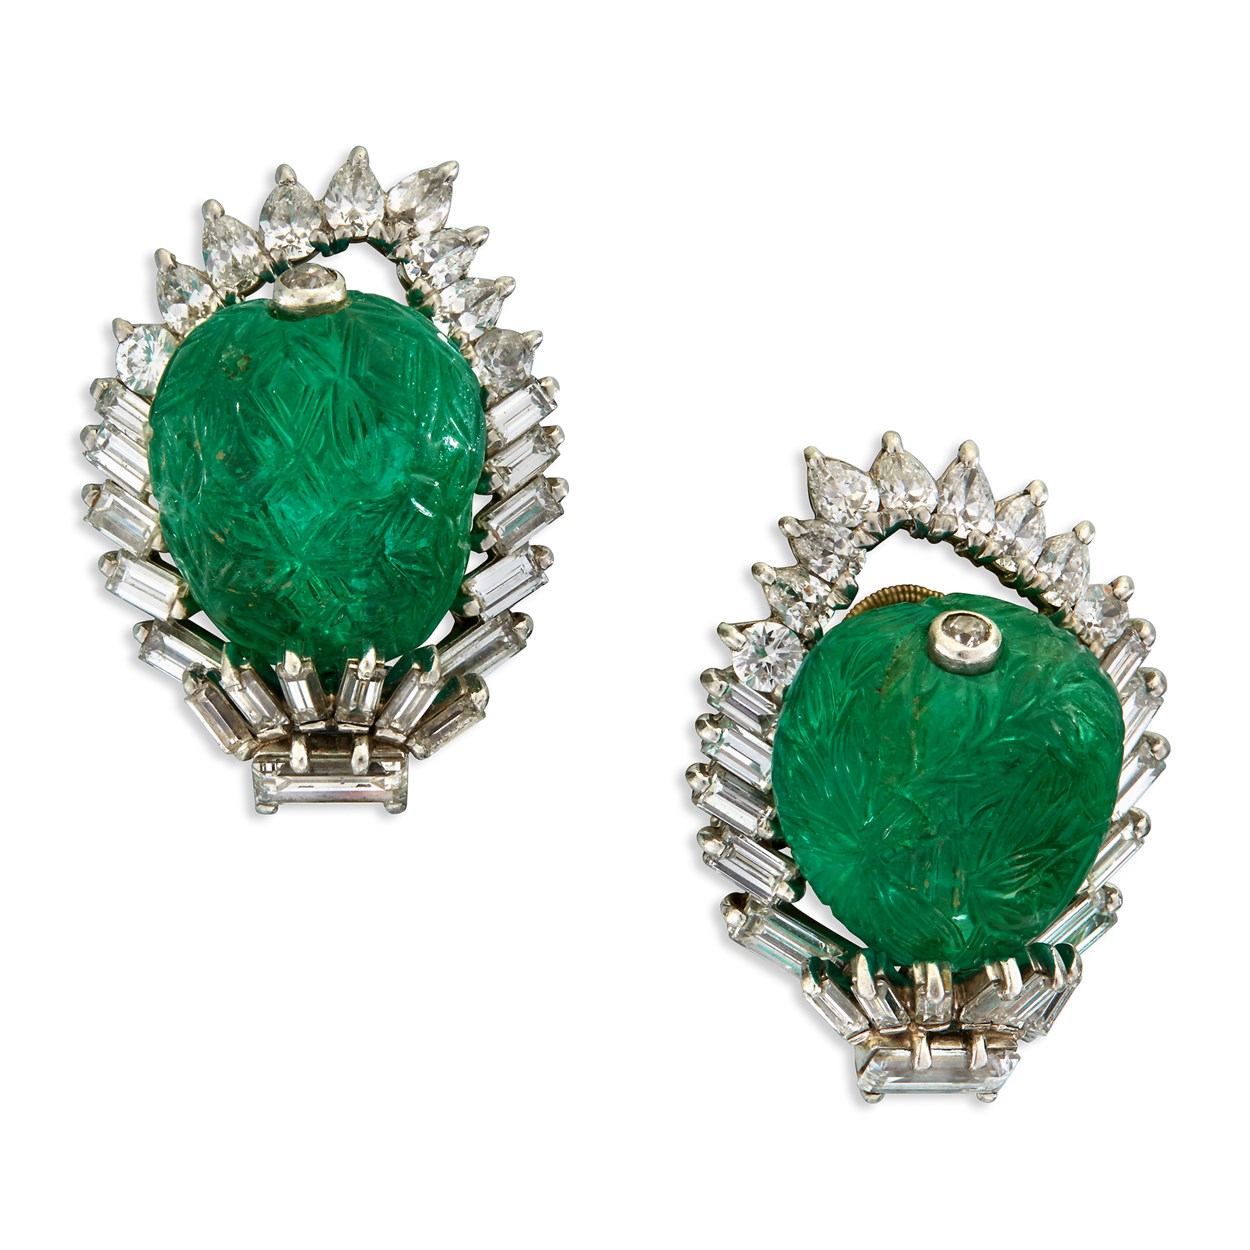 Lot 171 - A pair of carved emerald, diamond, and platinum ear clips, Monture Cartier